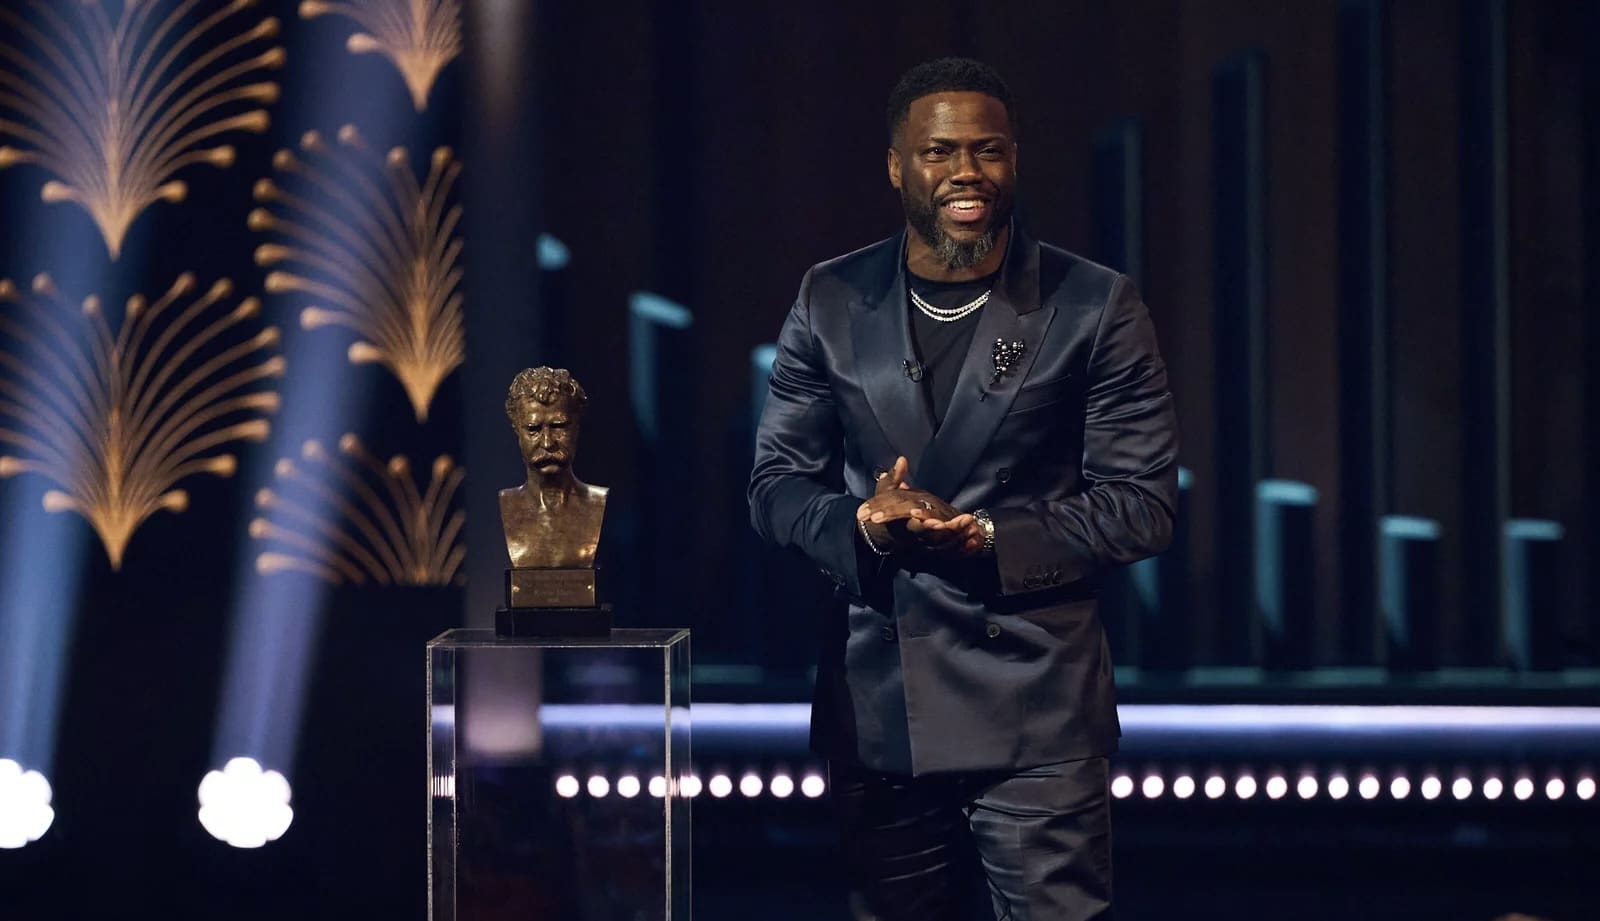 Comedian Kevin Hart Joins an Elite Group Honored with the Mark Twain Prize for American Humor